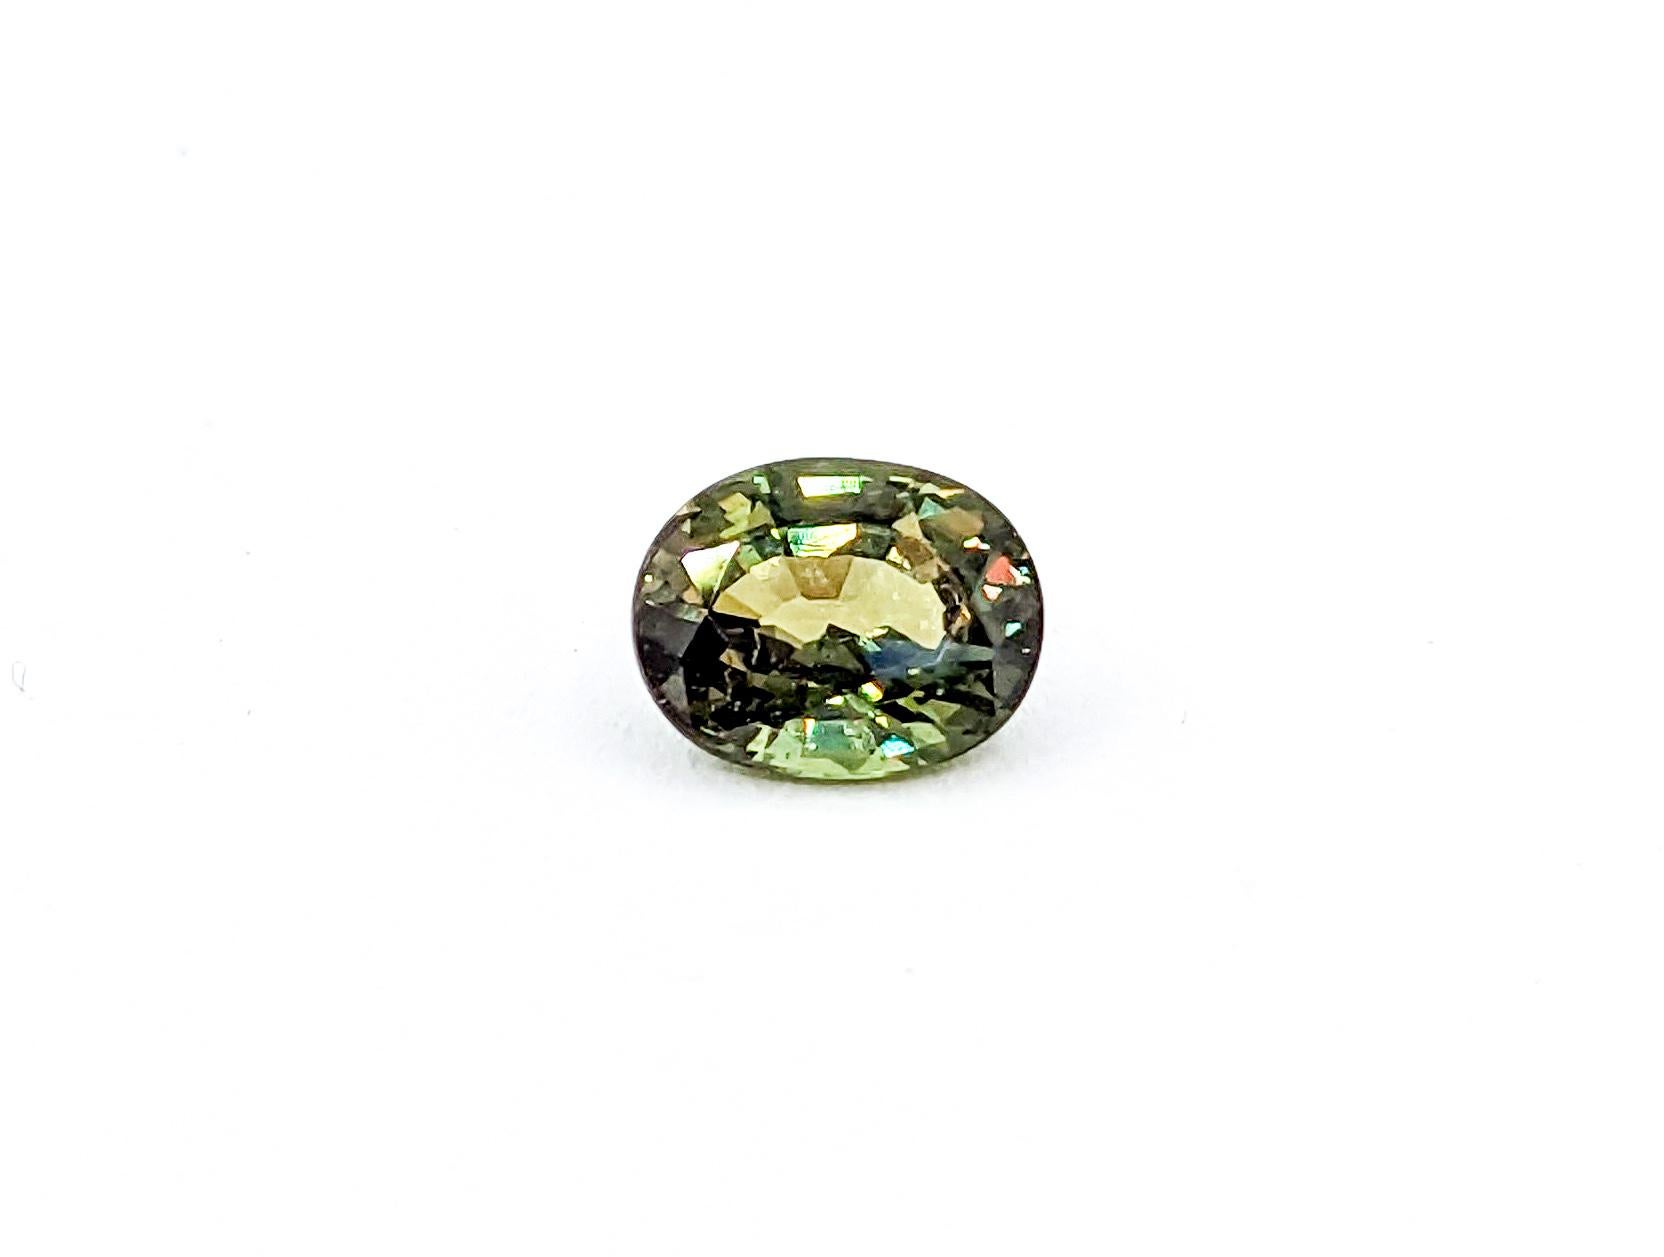 Introducing the pristine allure of an .85ct natural untreated Alexandrite. Freshly unearthed, this gem is a pure spectacle, featuring an oval brilliant cut that radiates enthralling color change from green to purple as it dances with sunlight. With